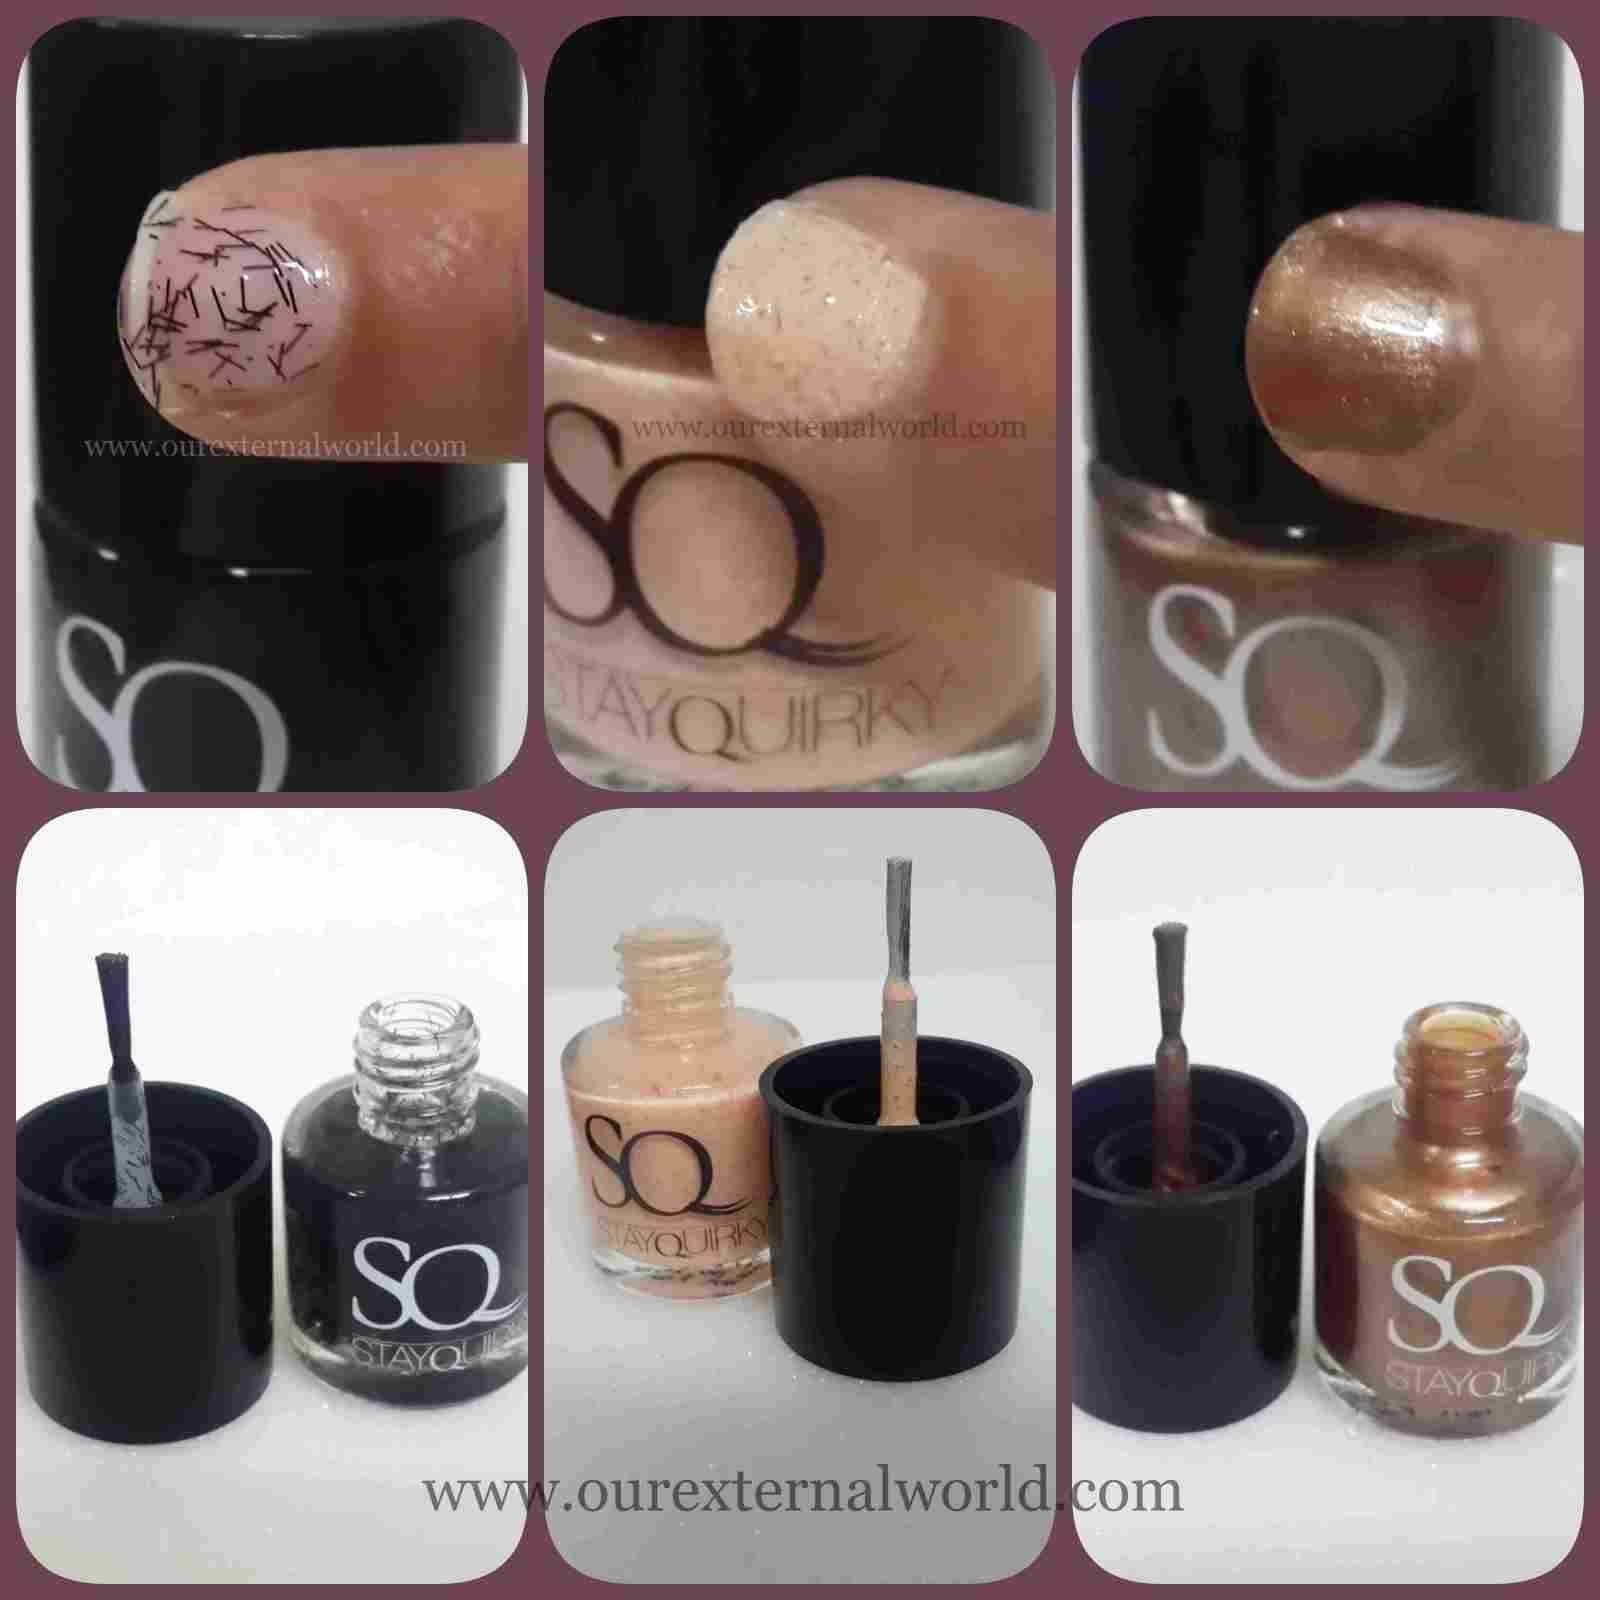 Buy Stay Quirky Nail Polish It's Nude Milady 491 at Purplle.com. Stay  Quirky Nail Polish It's Nude Milady 491 is nude form,reflects the true you.